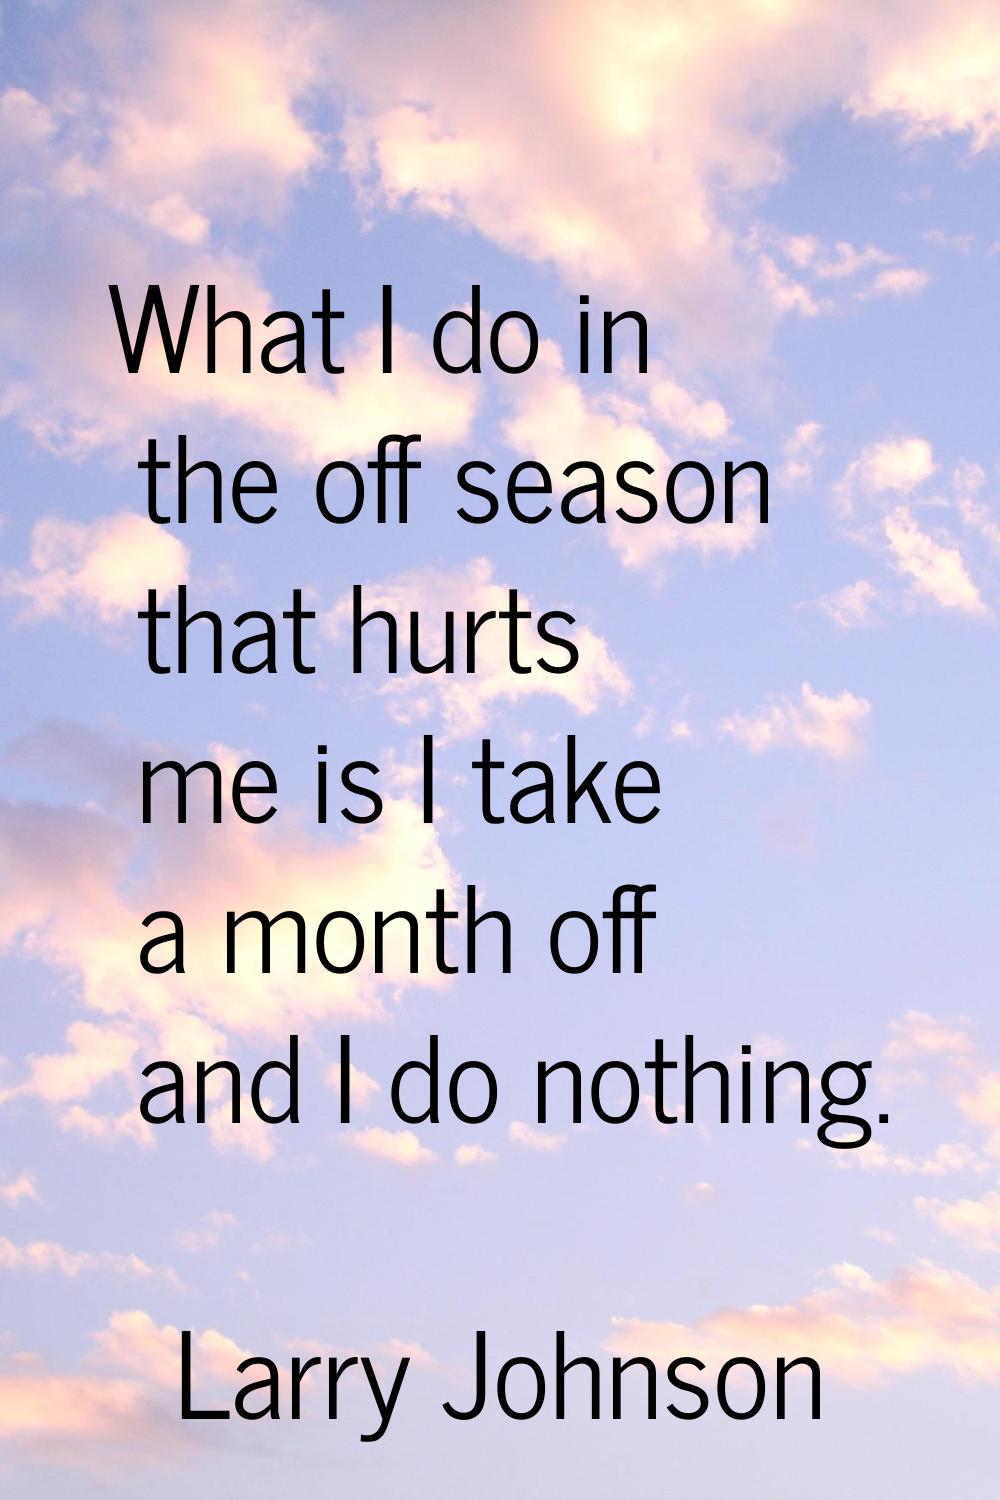 What I do in the off season that hurts me is I take a month off and I do nothing.